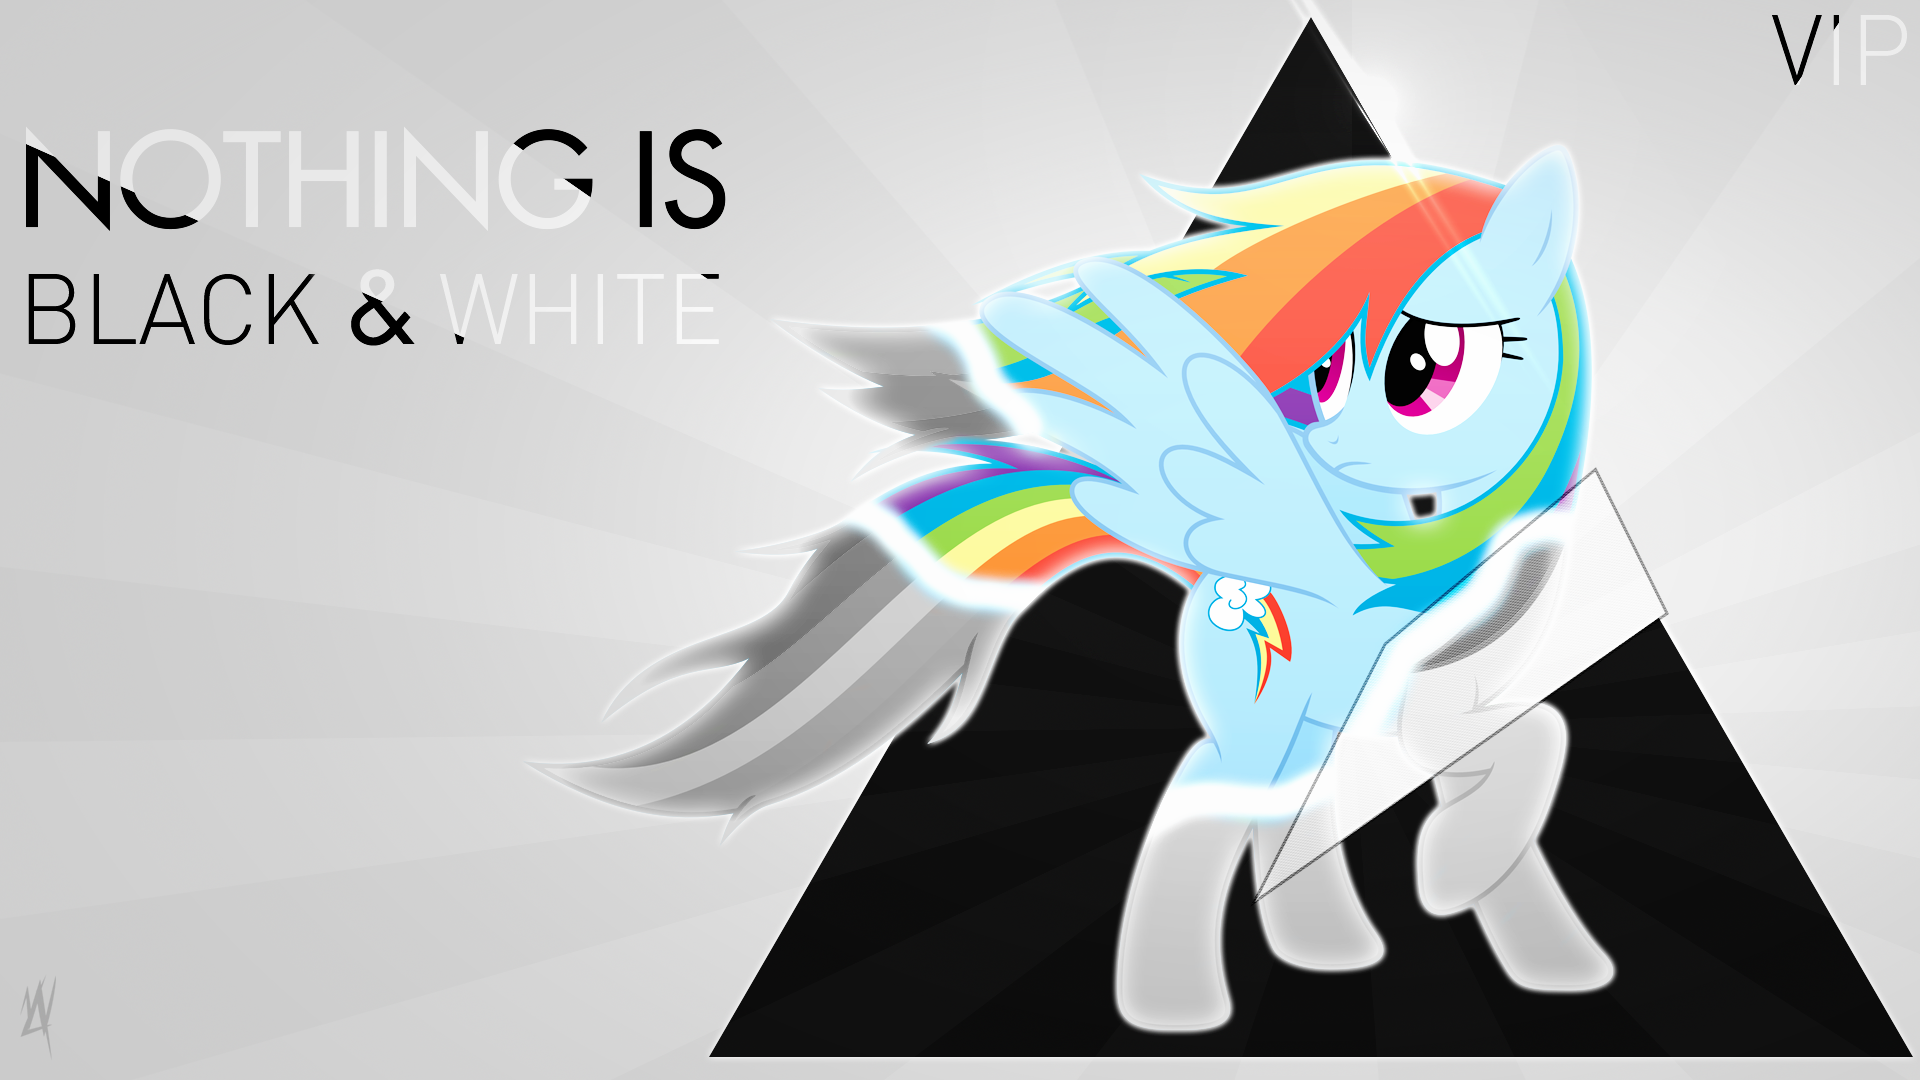 Nothing is Black and White [VIP] by MyLittleVisuals and tdreyer1